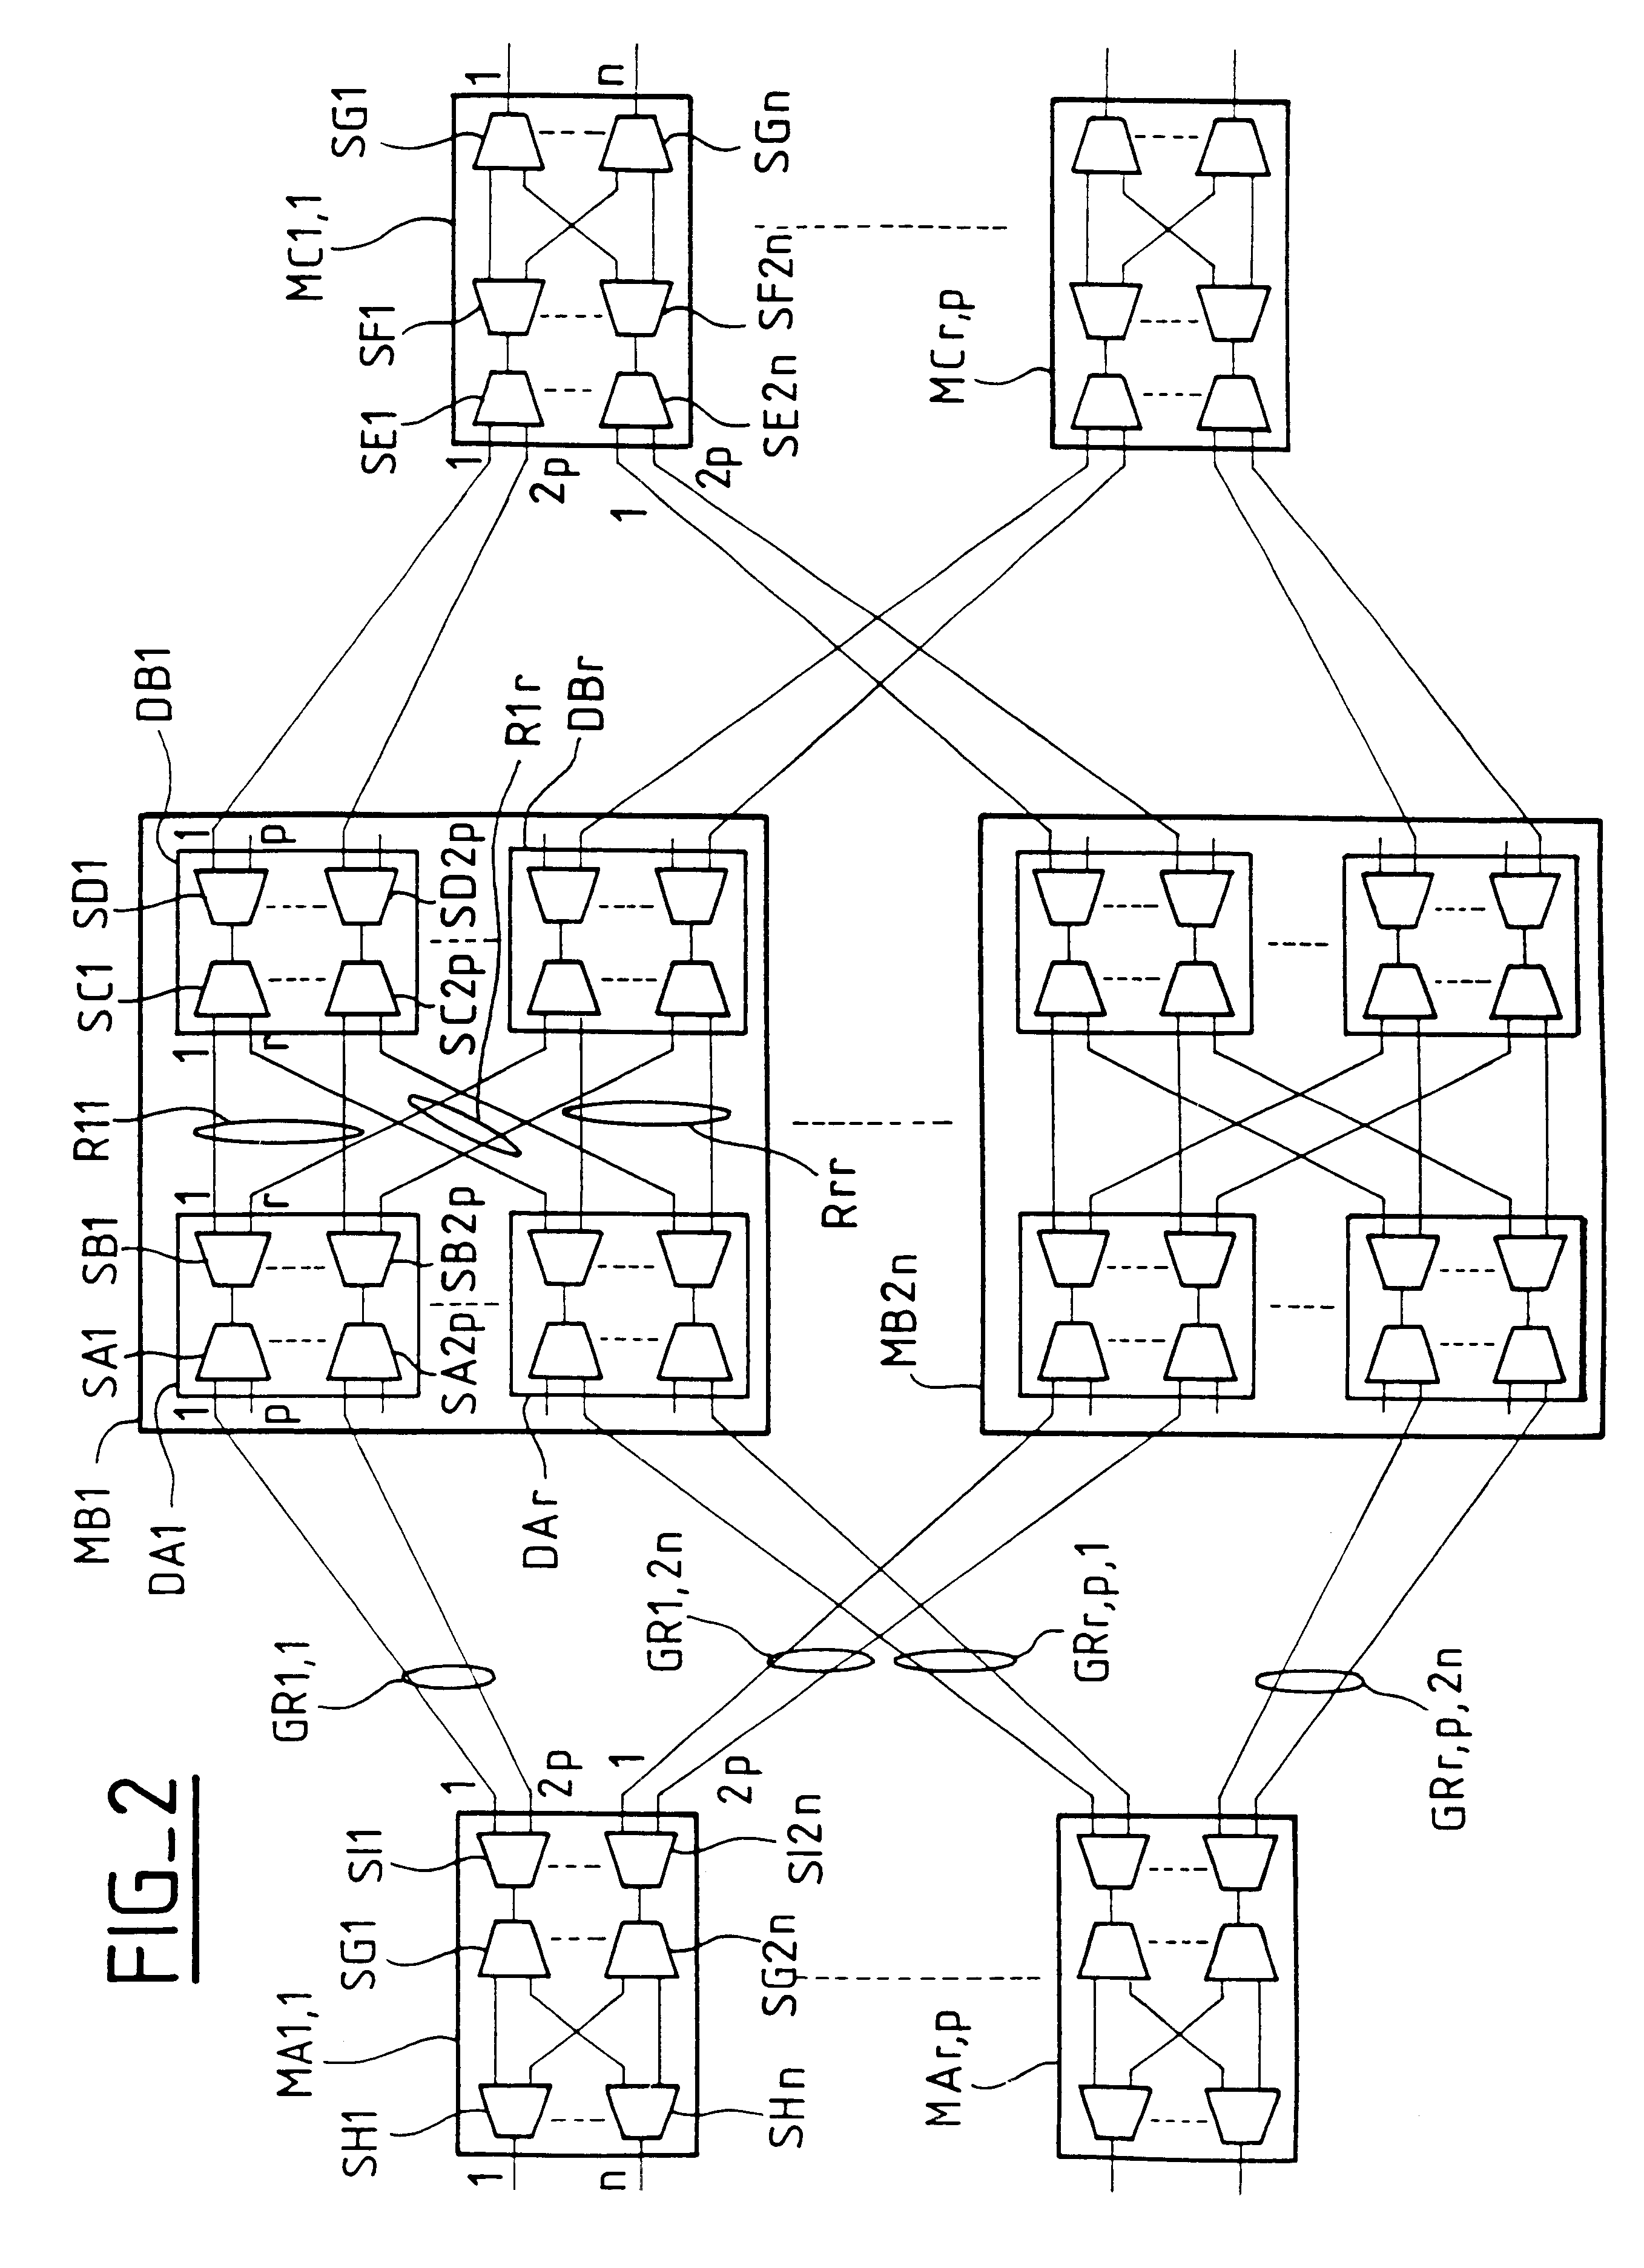 Switch modules, a switch matrix including such modules, and a non-blocking modular switch network including such a matrix